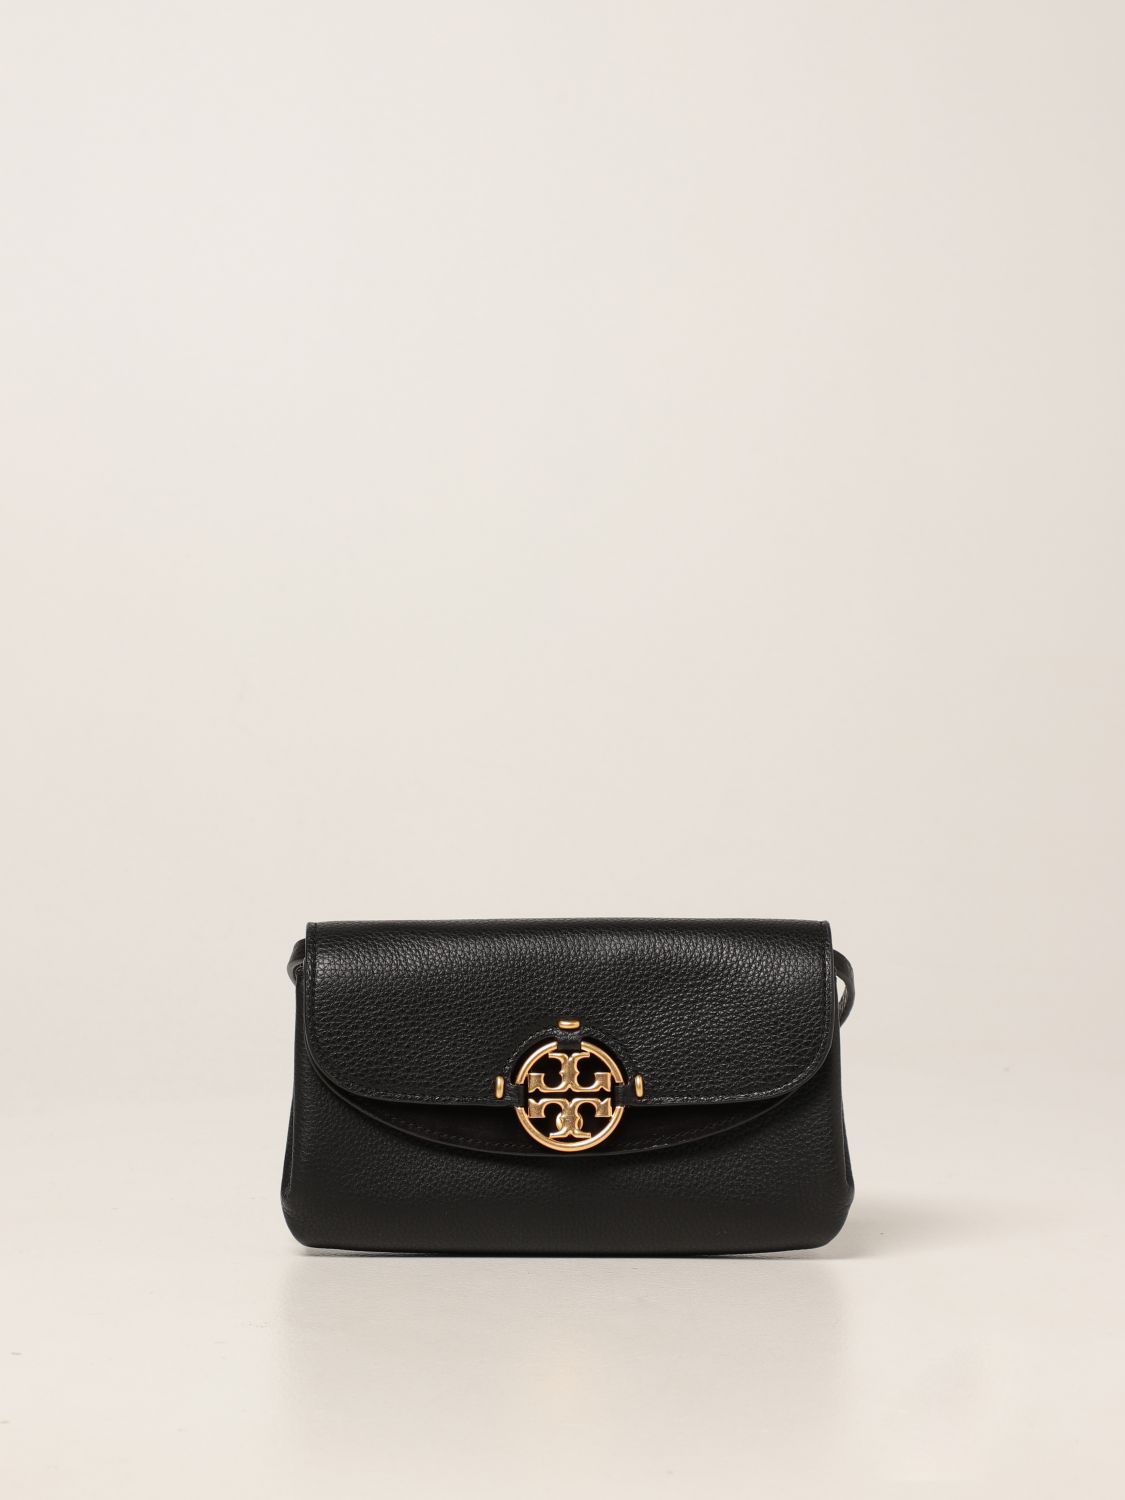 Tory+Burch+Miller+Wallet+Crossbody+Purse+80808+Black+Leather for